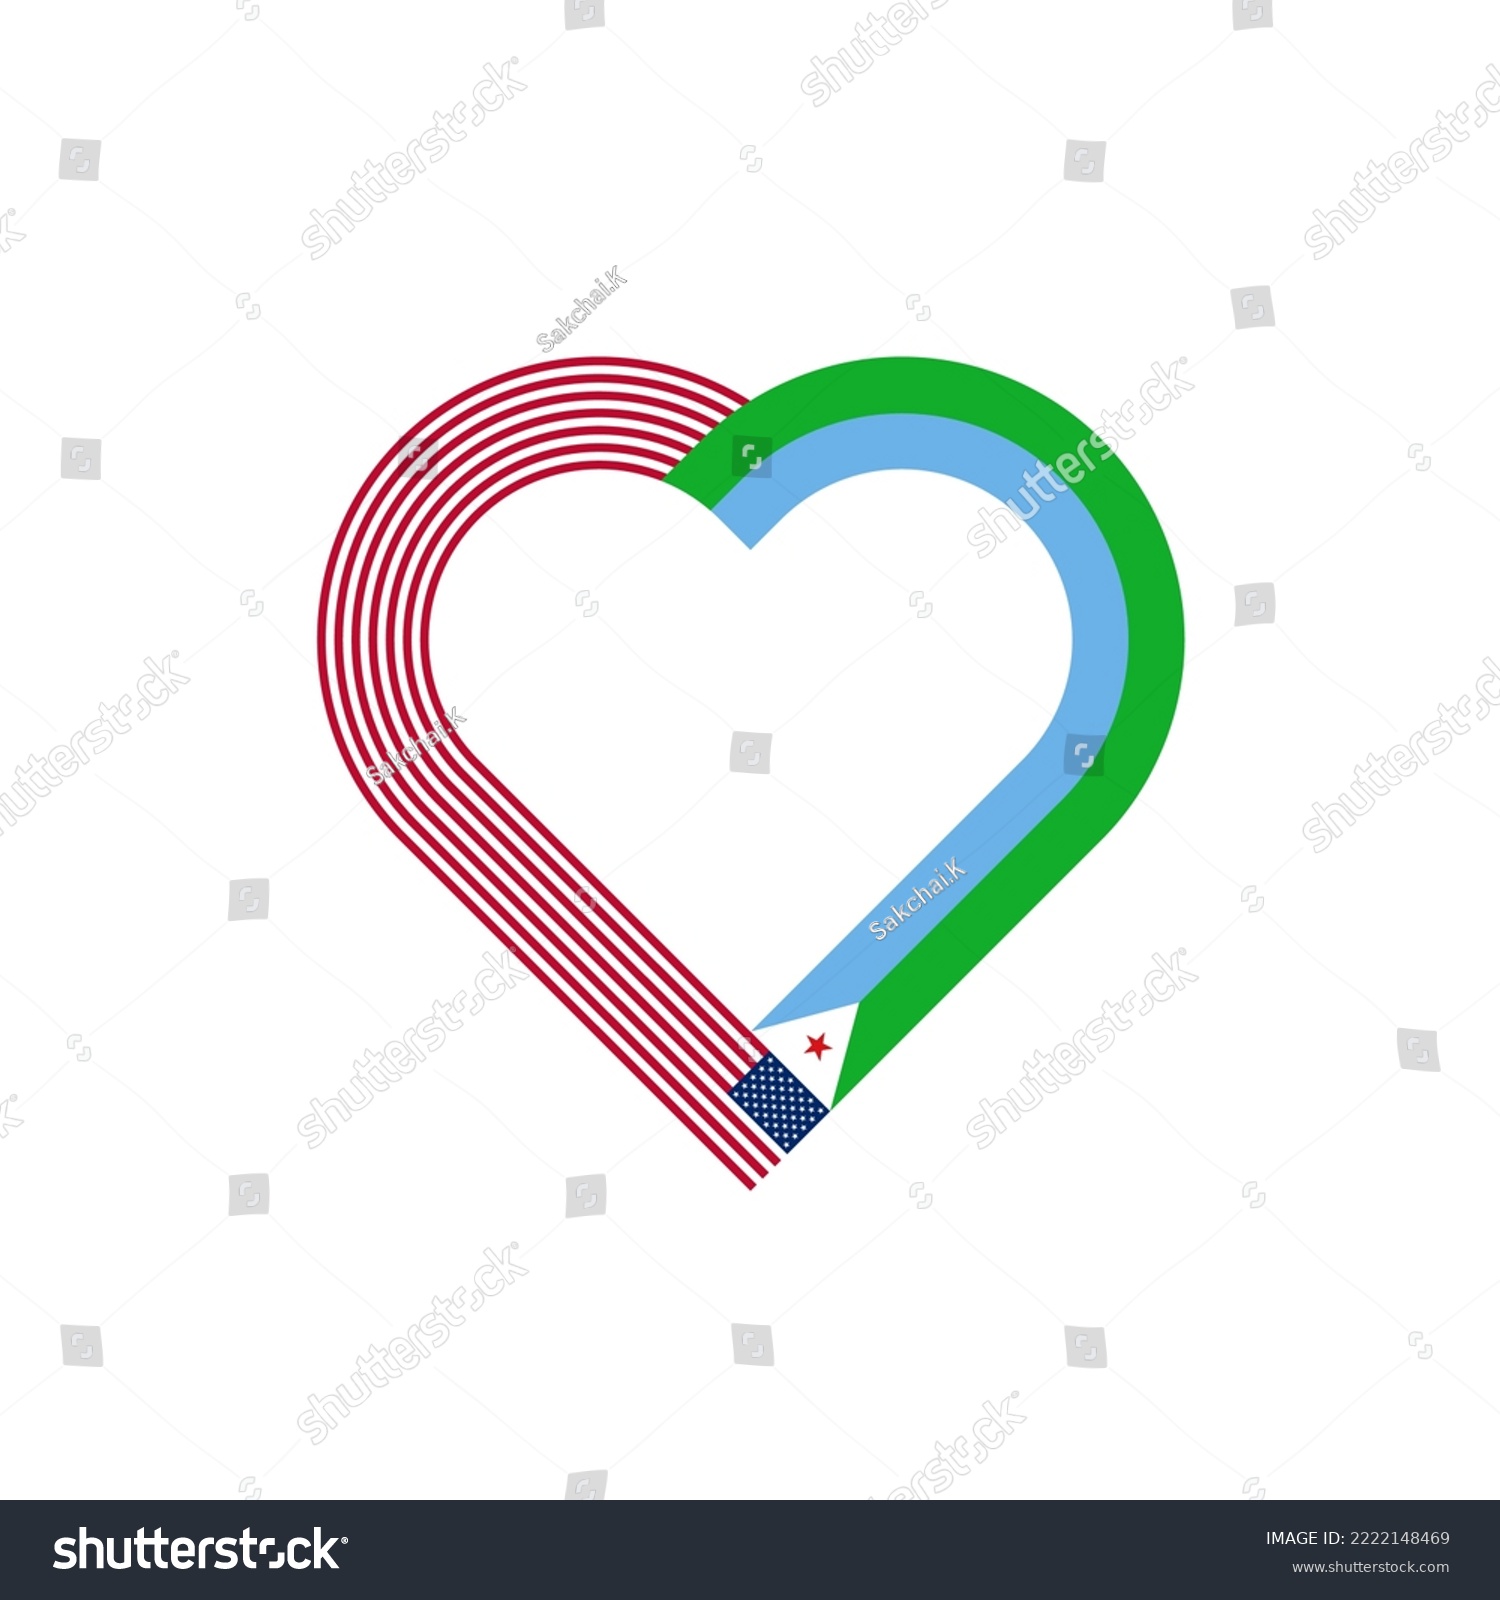 SVG of friendship concept. heart ribbon icon of united states and djibouti flags. vector illustration isolated on white background svg